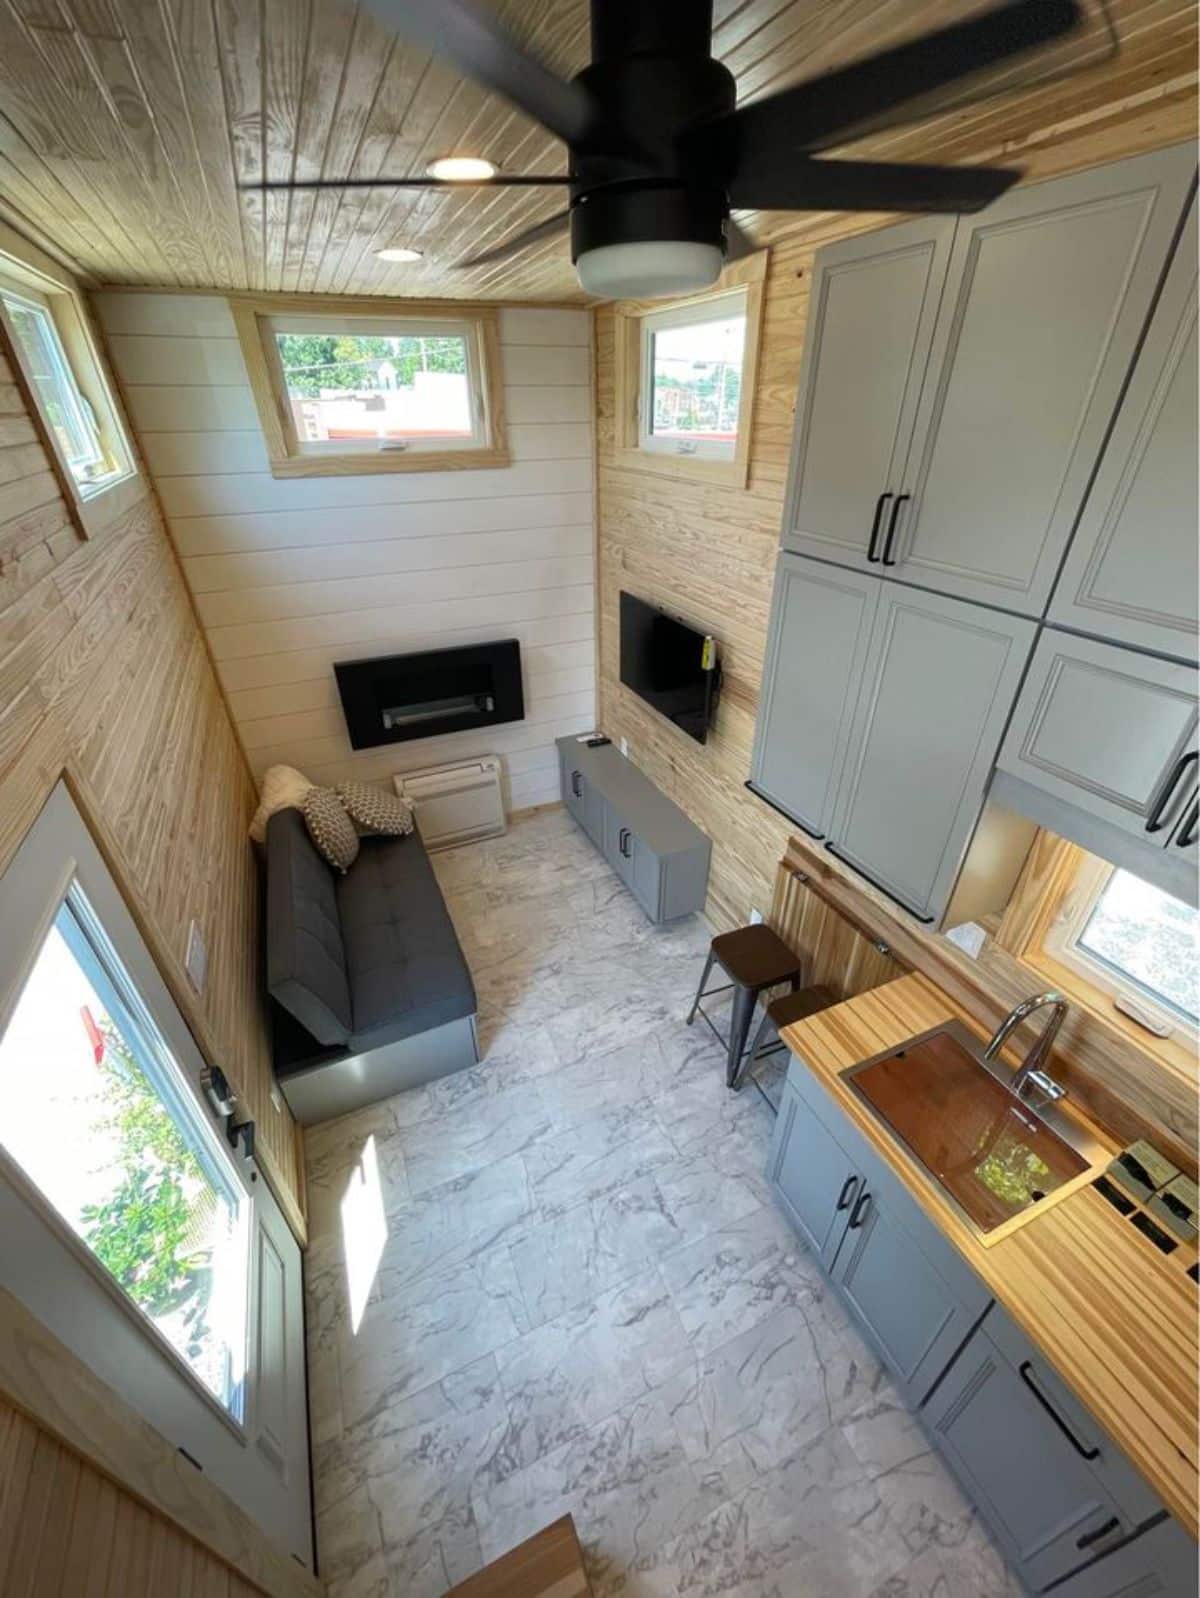 Overall view of stunning 24' Luxury Tiny House from loft view